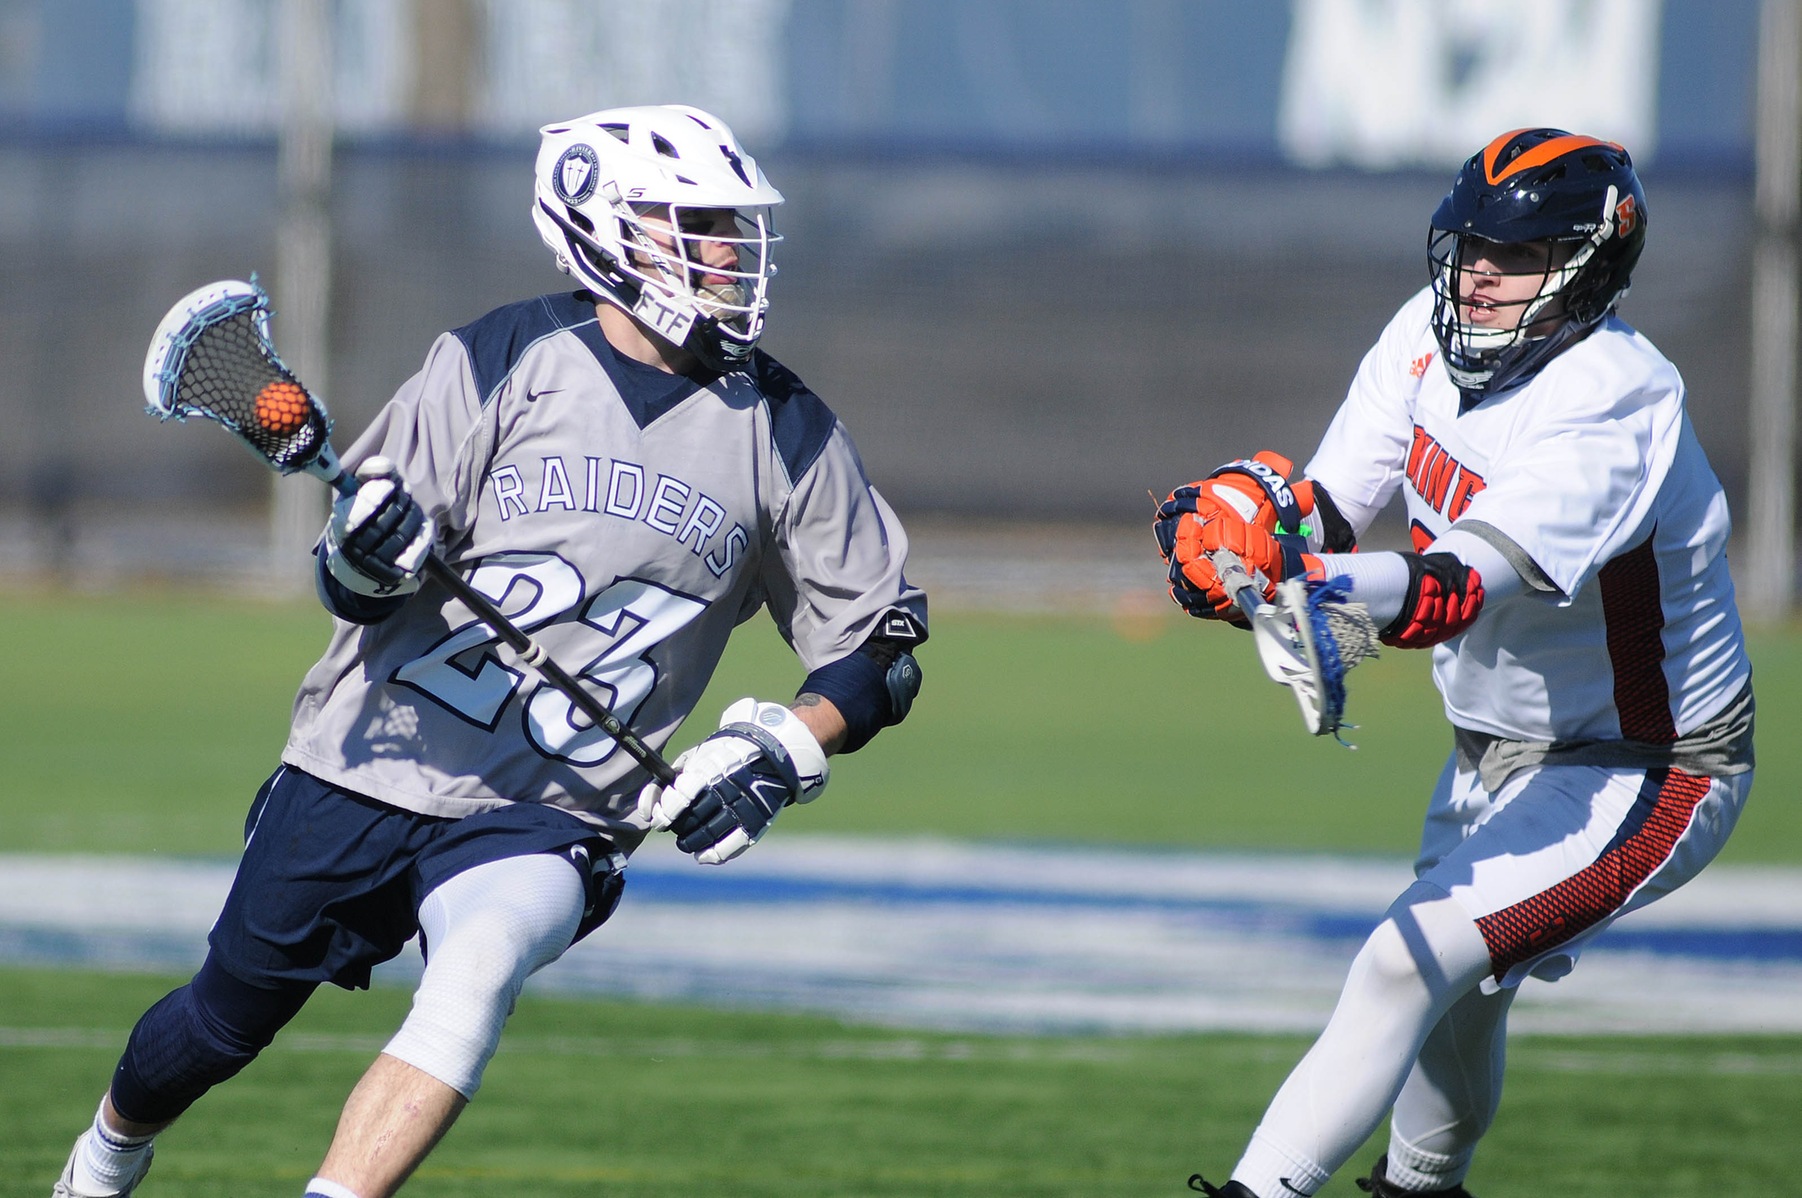 Men's Lacrosse: Raiders suffer conference loss to Lasers, 18-7.